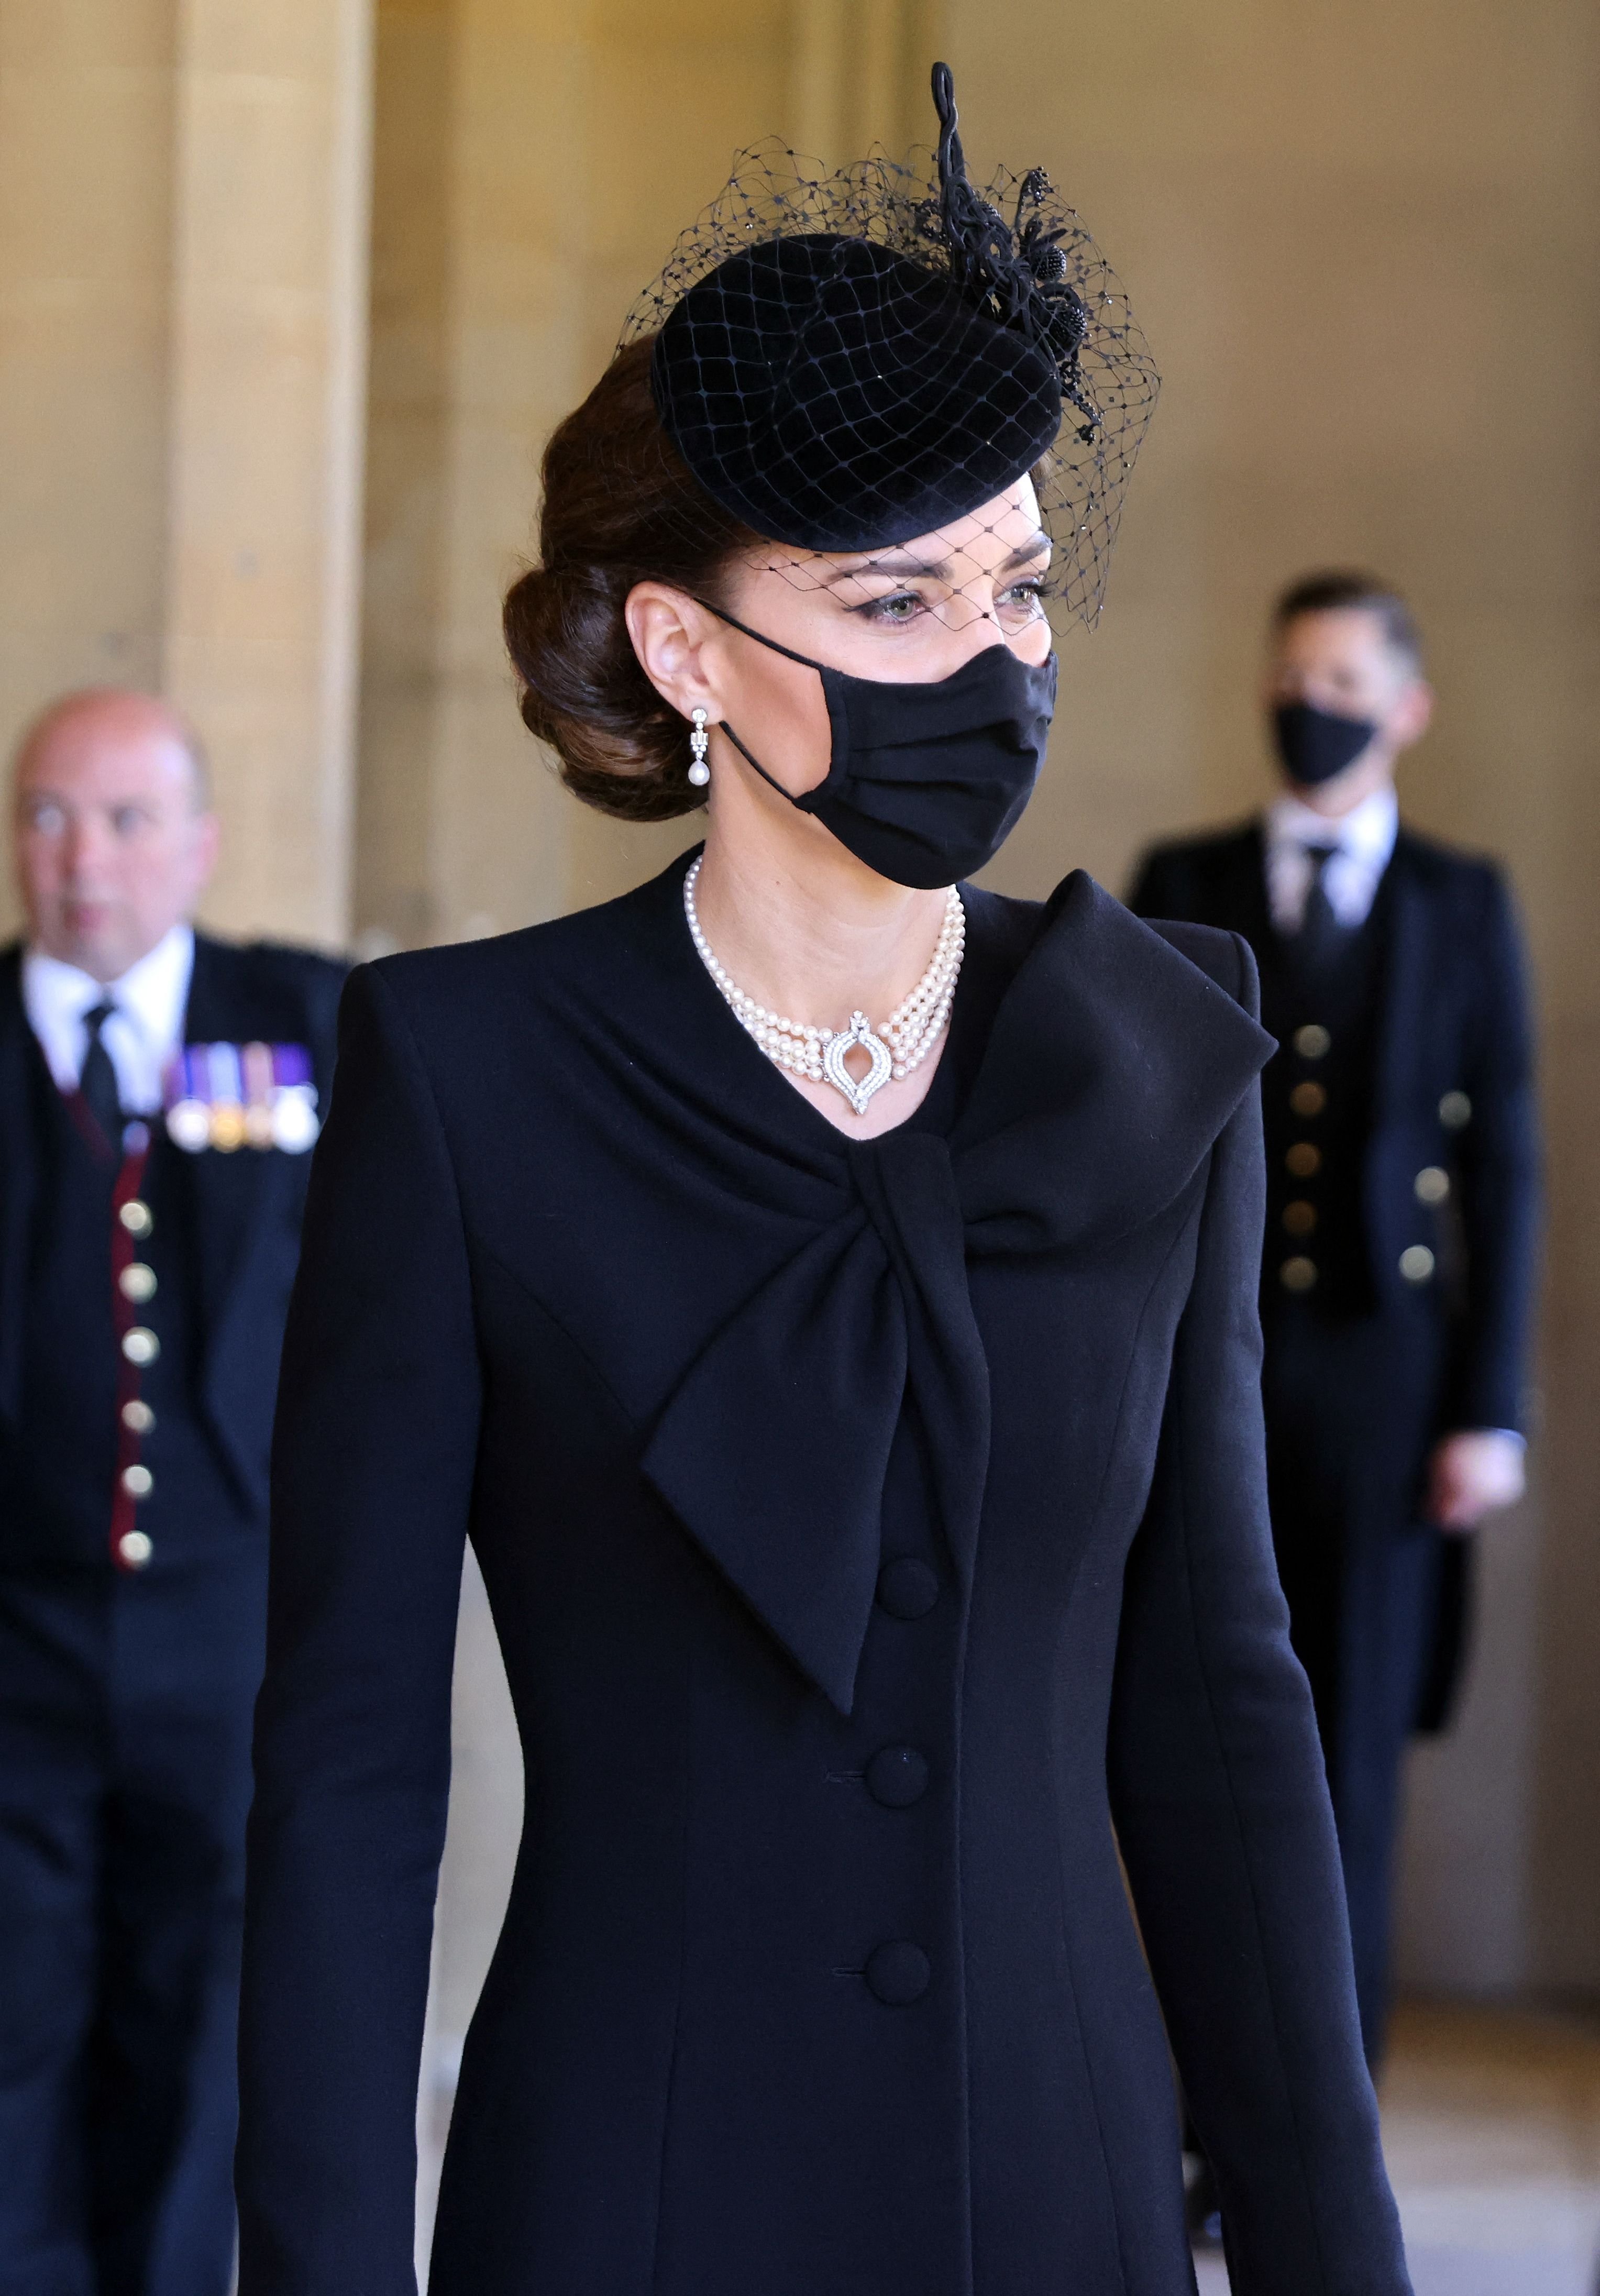 Kate Middleton, Duchess of Cambridge, during the funeral of Prince Philip, Duke of Edinburgh at St George's Chapel in Windsor Castle on April 17, 2021 in Windsor, London. / Source: Getty Images